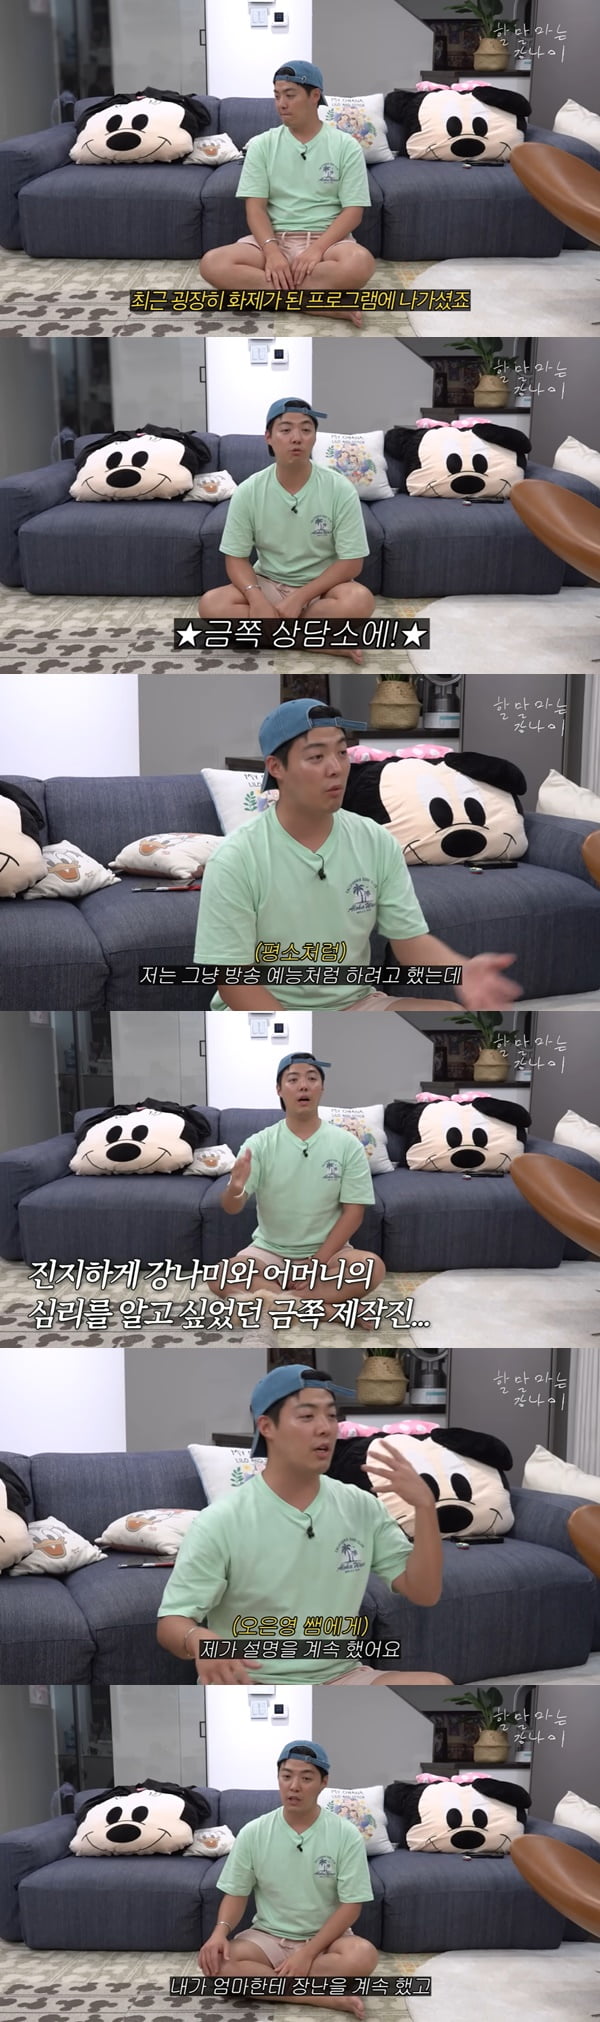 Broadcaster Gangnam District has revealed that he was diagnosed with ADHD by Oh Eun Young Doctorate.On the 18th, a video was posted on the YouTube channel Friend Kang Nam-mi! with the title I met Oh Eun Young.Friend Kang Nam-mi! The production team asked, Youve been on a program thats been very popular lately. Gangnam District replied, Yes, I went to a gold counseling center with my mother.The production team said, There were a lot of articles. Gangnam District explained, I just wanted to do it like a broadcast entertainment, but the station wanted to shoot Mother and Gangnam District and wanted to know the psychology.Gangnam District said, I kept explaining, I lived like this when I was a kid, I kept playing tricks on Mother, and Mother kept yelling, I just remember being angry, I explained everything from 1 to 100.I even talked about that. When Mother gets angry, she breaks the wall, he confided.Gangnam District said, Oh Eun Young Doctorate heard the story and at the end, I thought he would say, My mother is not really real.Gangnam District said it was ADHD. My sister, who is sitting here, also got bigger eyes. I said, I told 10 stories and told Mother stories, but the Doctorate said ADHD correctly. In addition, Gangnam District is almost certified in the country. Oh Eun Young Doctorate is correct. People are tearful at the station and there are many things. I understand. It is accurate.There was a reason why I was always joking with my mother. Doctorate pulled out the heart that I did not know and knew the truth. I had to explain exactly why I should not explain it to me, but Mother could not explain it in Japanese.I did not communicate, so I said Do not do it, but I did not know the process and I only knew the angry appearance. Gangnam District said, When I play with Mother, Mother has a strong reaction. She told me that it was communication. She said she tried to communicate with Mother. Suddenly it is sad.Lee Sang-hwa, wife of Gangnam District, said, My mother told me that she was suffering from me.Im sorry for my bad son.Gangnam District said, So after hearing about it, I never fought with my mother. I did not meet her. What really surprised me is that Mother did not ask.Oh Eun Young Doctorate said, Mother is a person who cares about other peoples eyes.